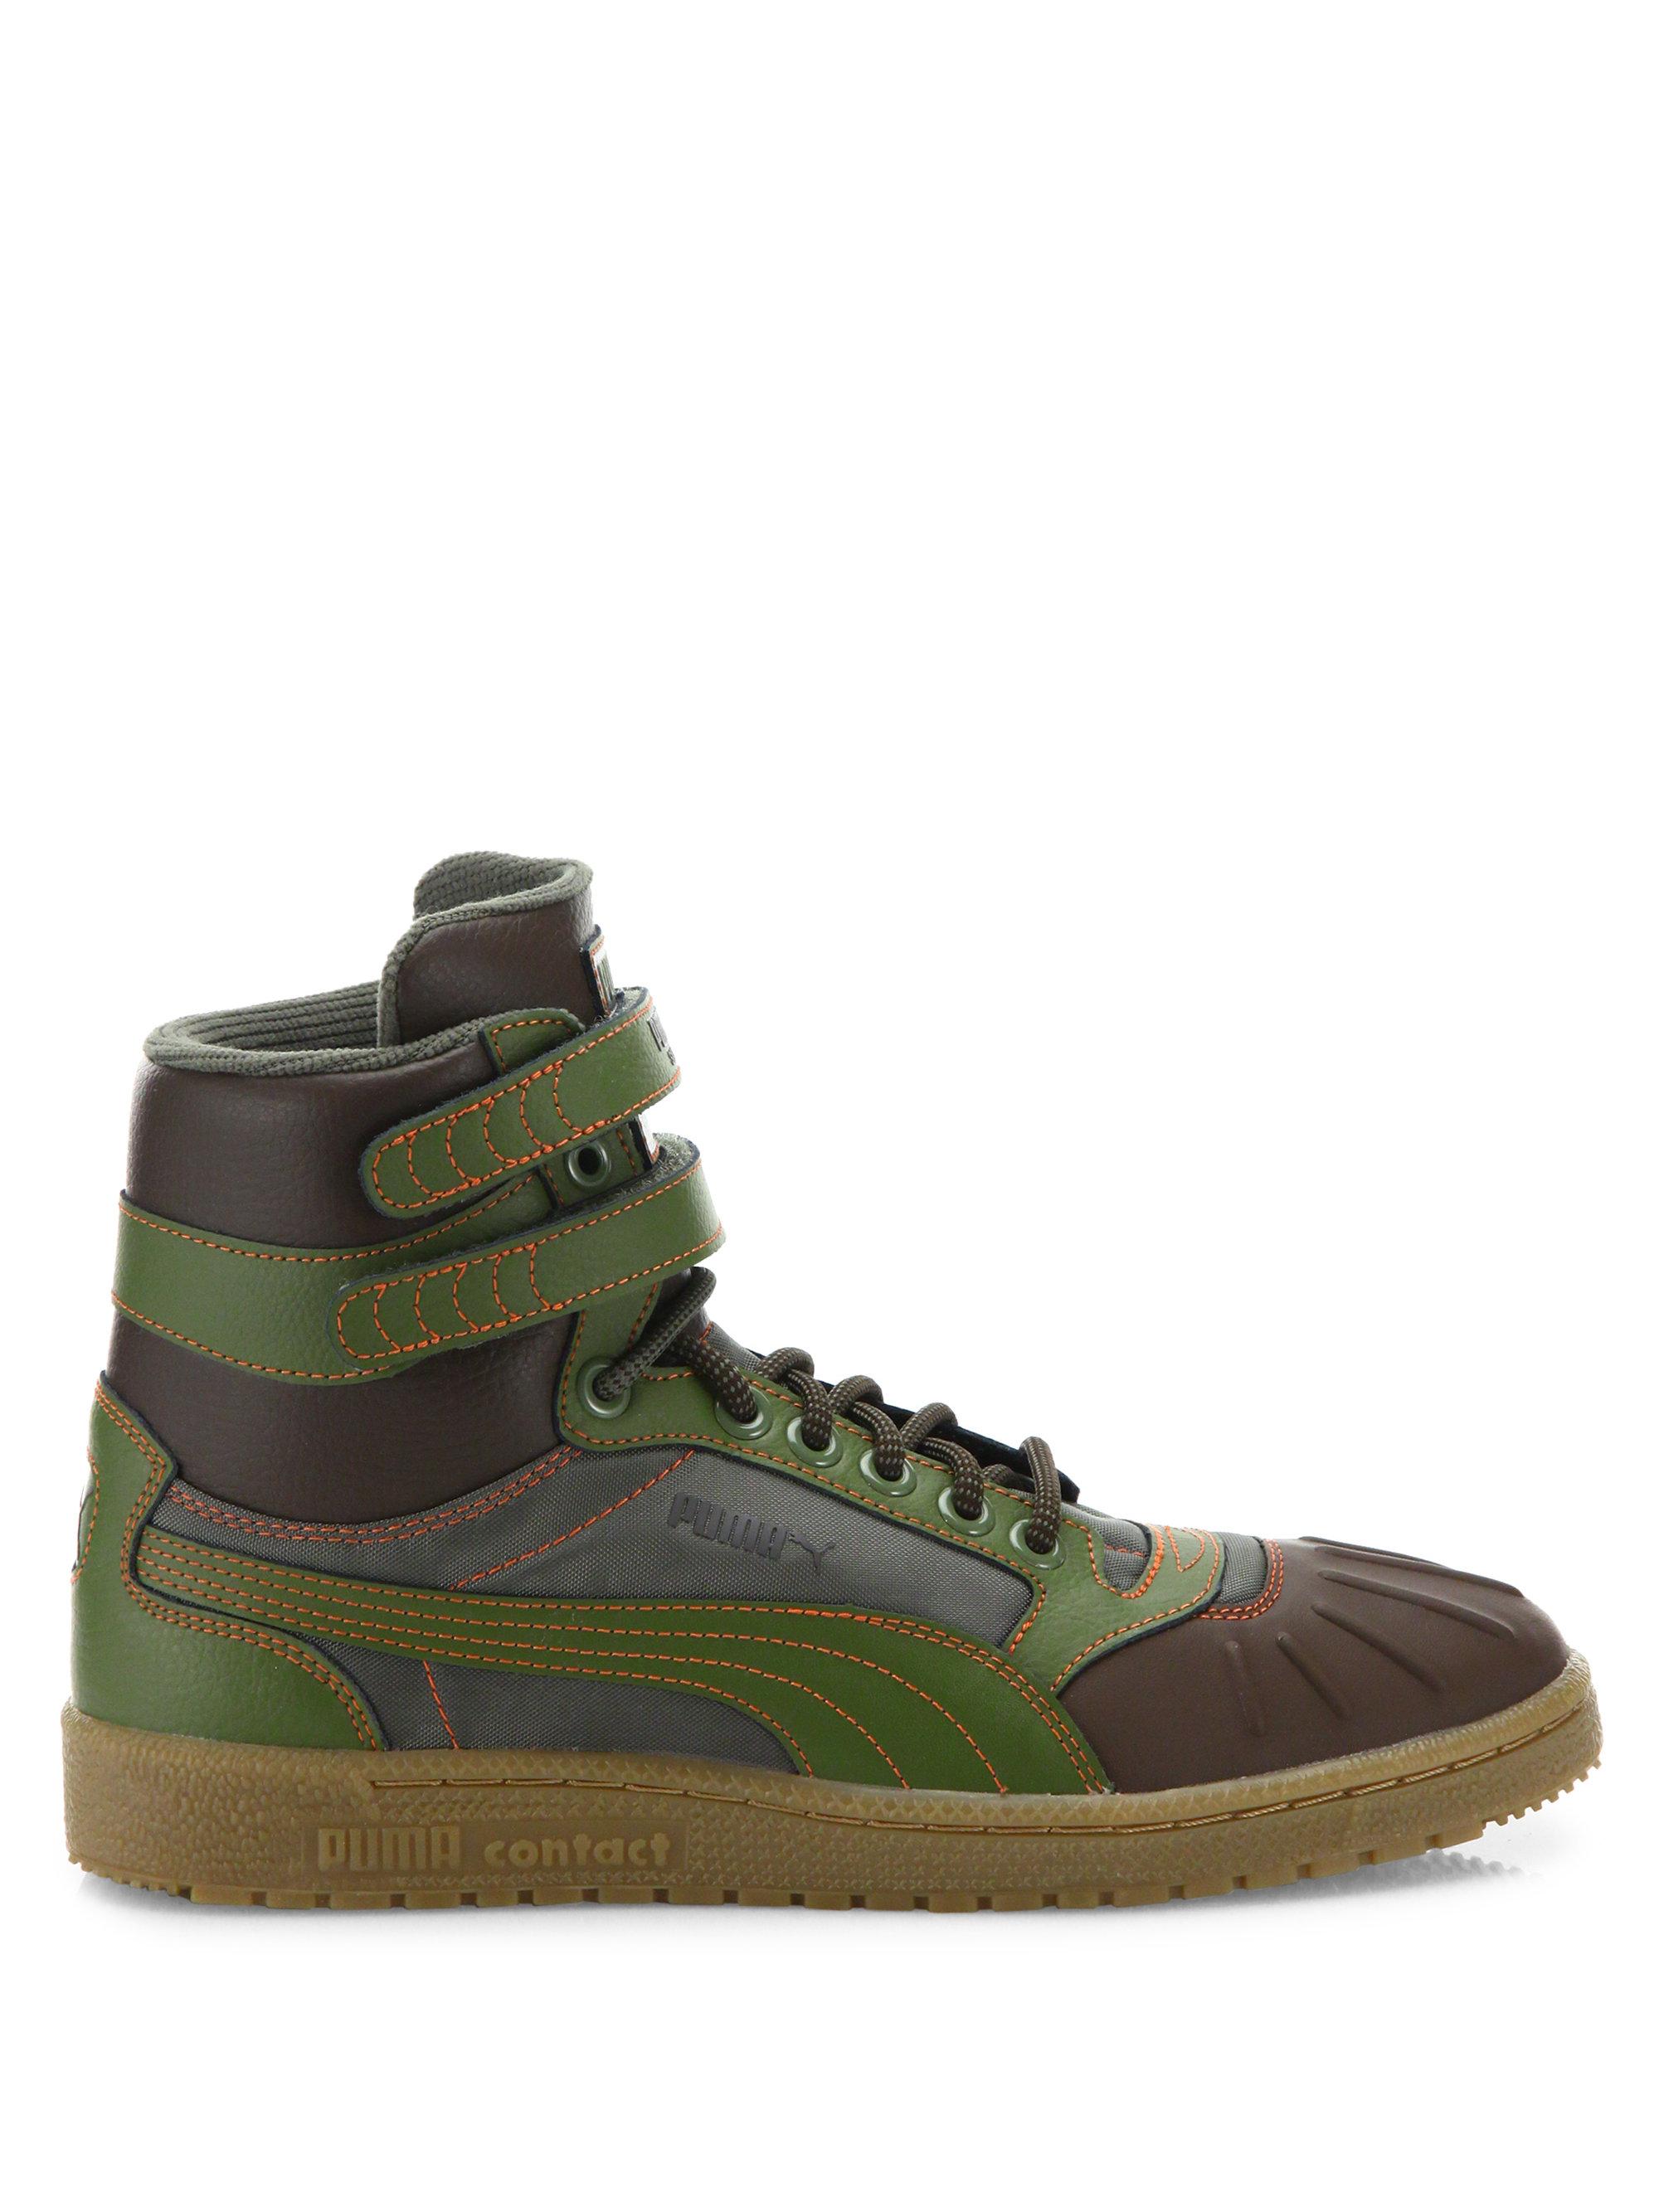 PUMA Sky Ii Hi Duck Leather Boots in Brown for Men | Lyst